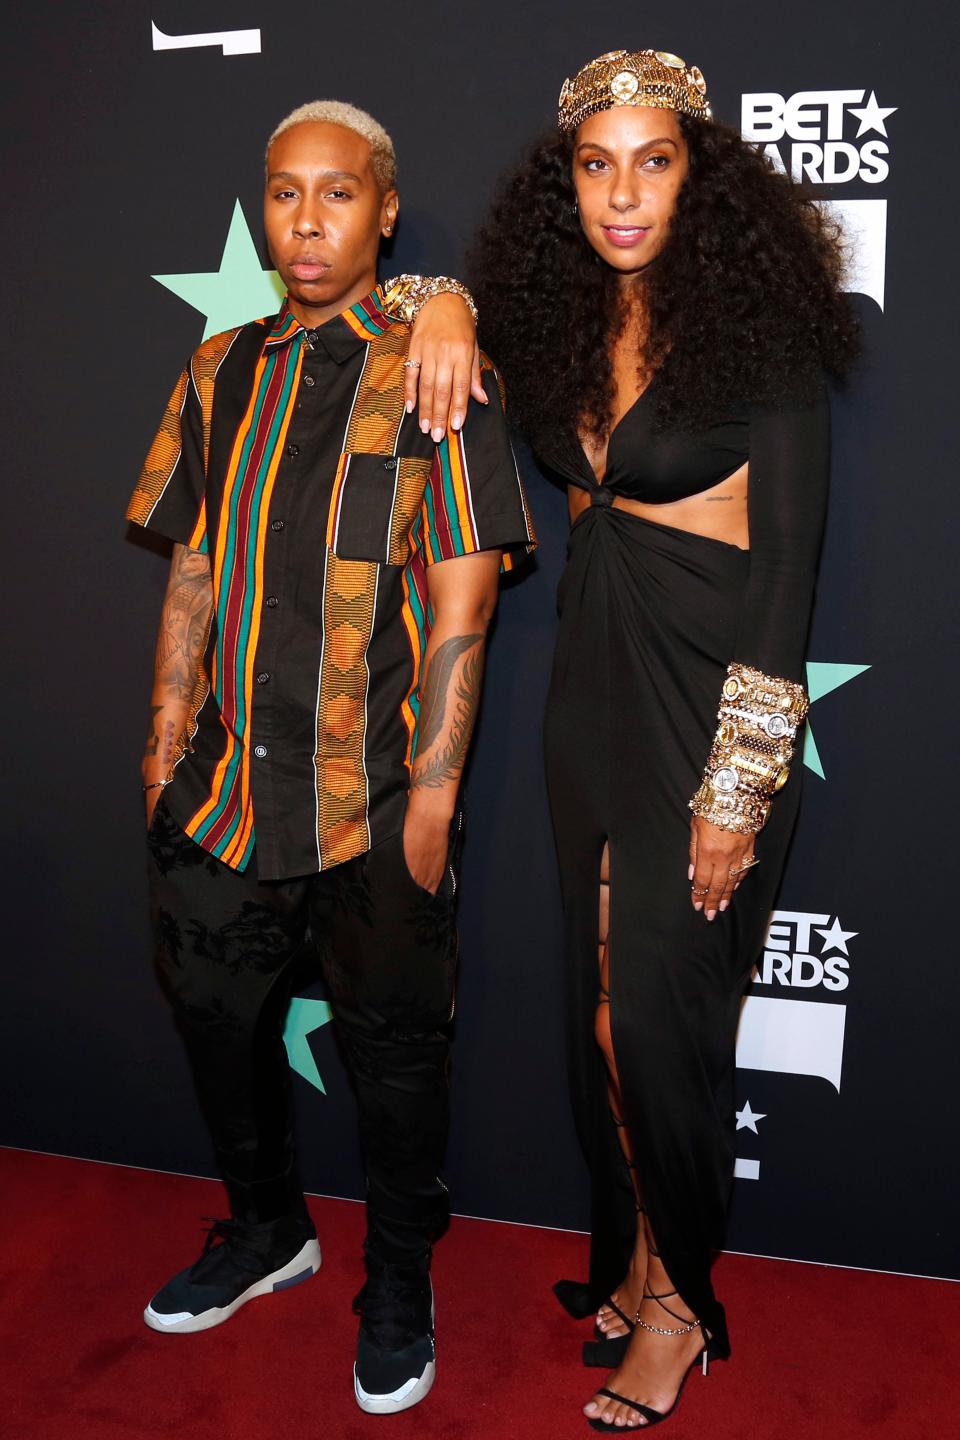 <cite class="credit">Liliane Lathan/Getty Images for BET</cite>